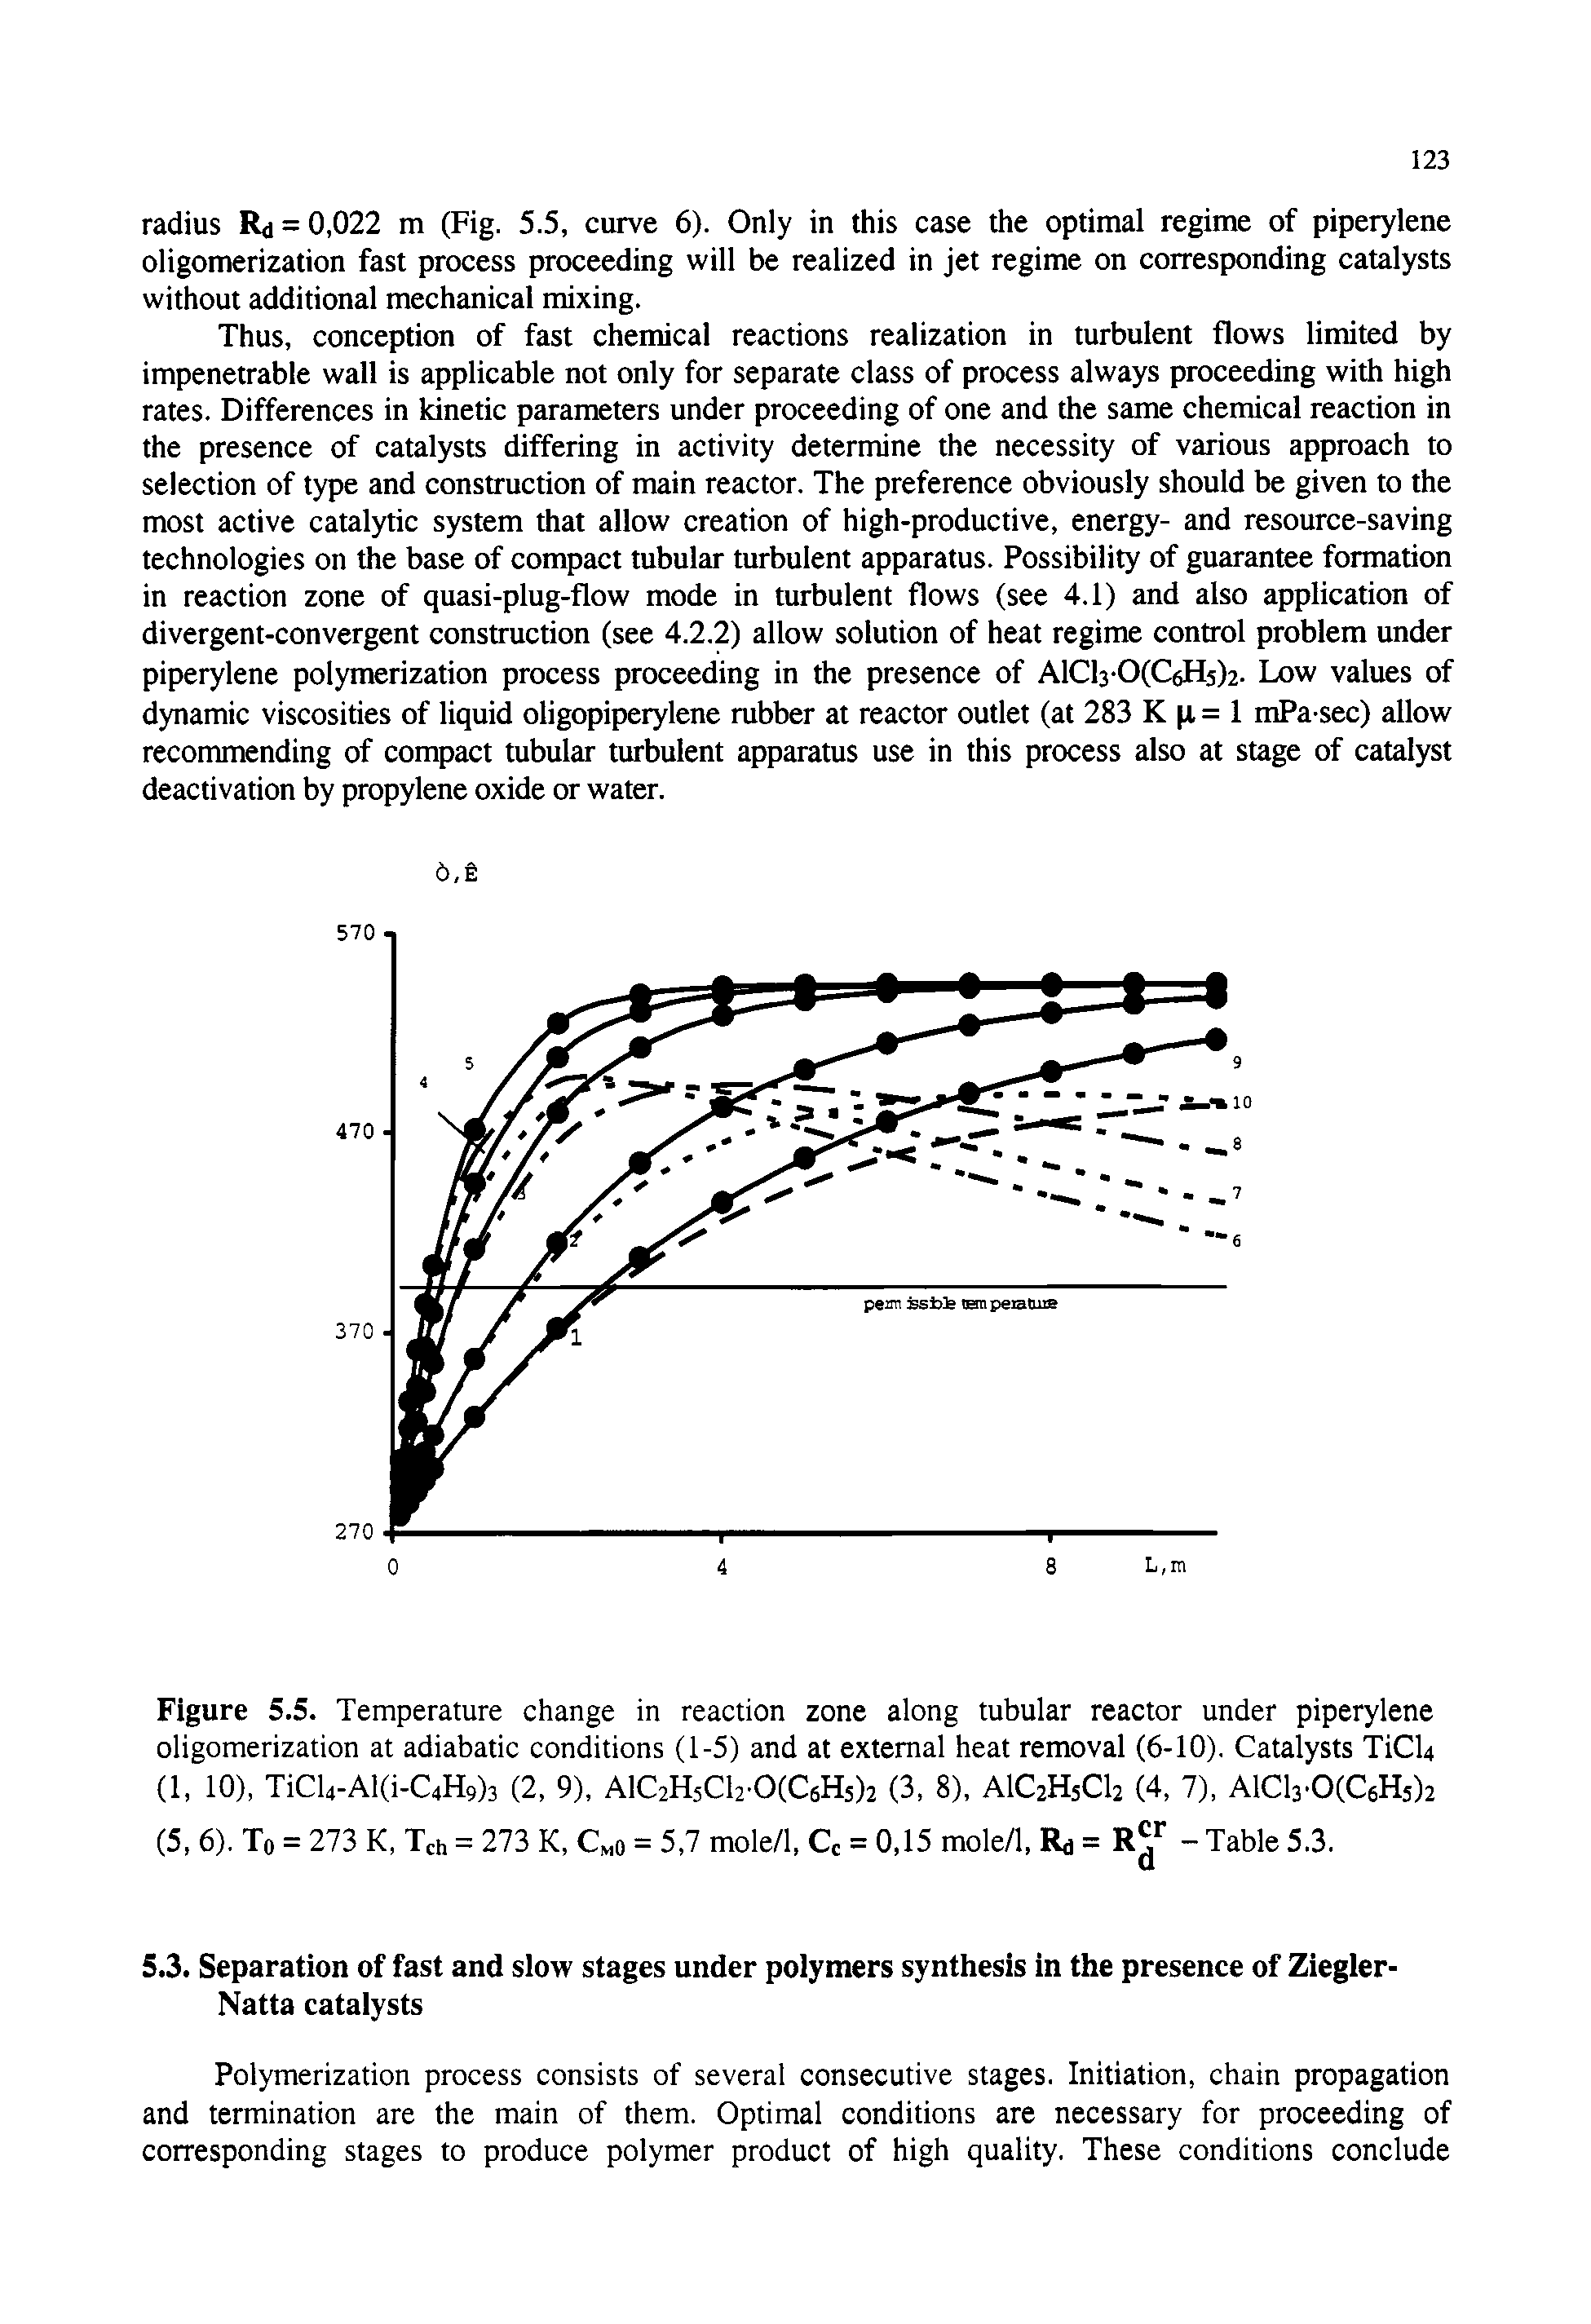 Figure 5.5. Temperature change in reaction zone along tubular reactor under piperylene oligomerization at adiabatic conditions (1-5) and at external heat removal (6-10). Catalysts TiCU (1, 10), TiCl4-Al(i-C4H9)3 (2, 9), AlC2H5Cl2 0(C6H5)2 (3, 8), AIC2H5CI2 (4, 7), AlCl3-0(C6H5)2...